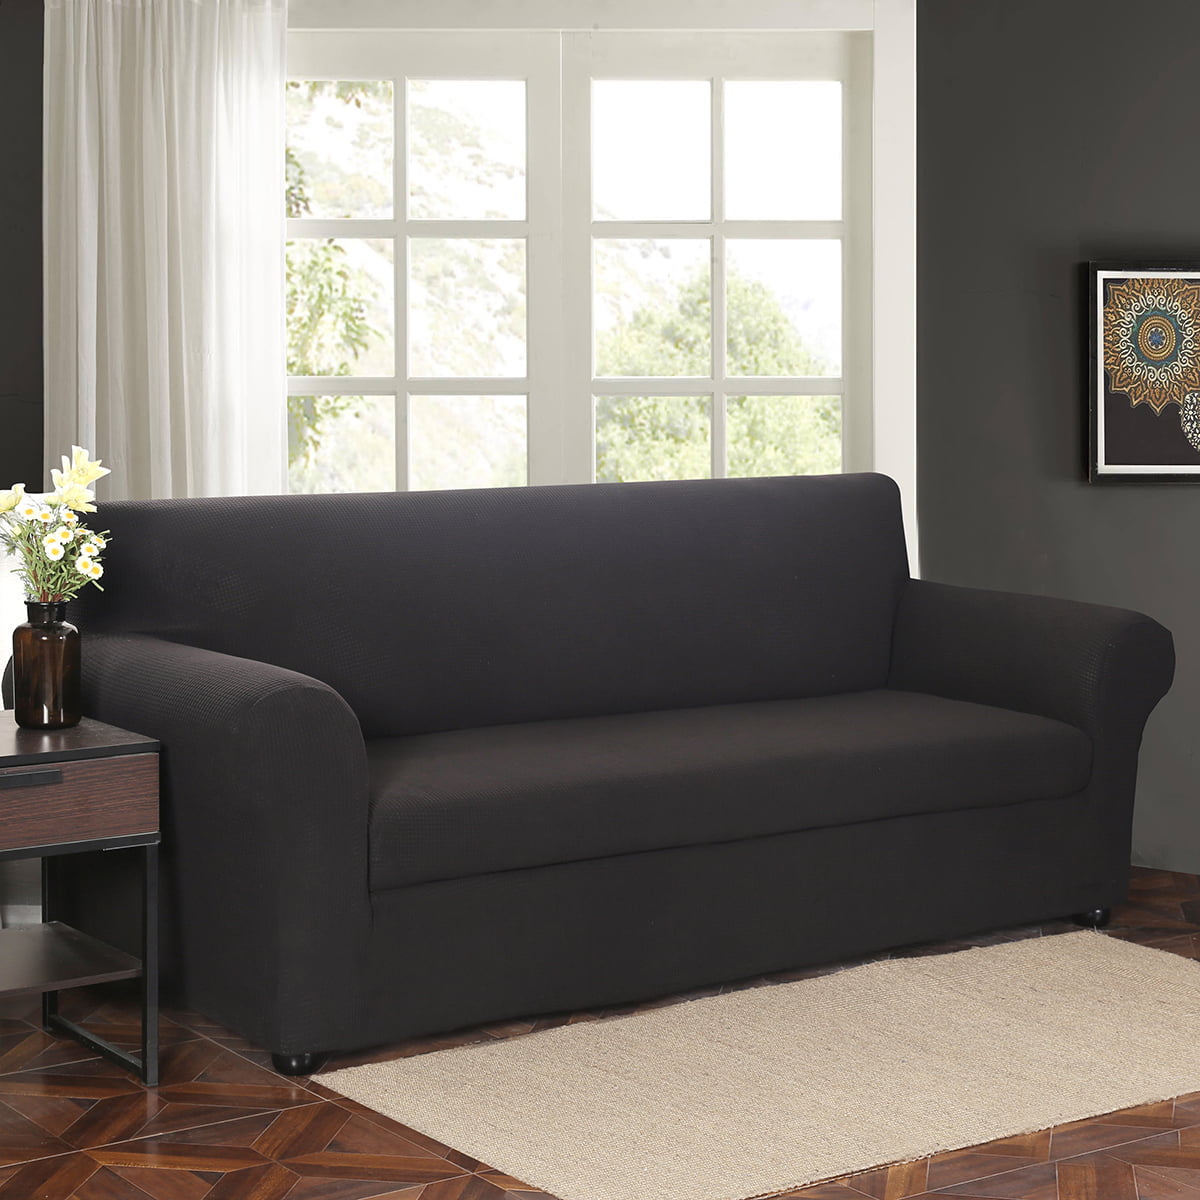 Details about   1-4 Seater Sofa Covers Slipcovers Stretch Retro Corner Sofa Sectional Couch Fit 